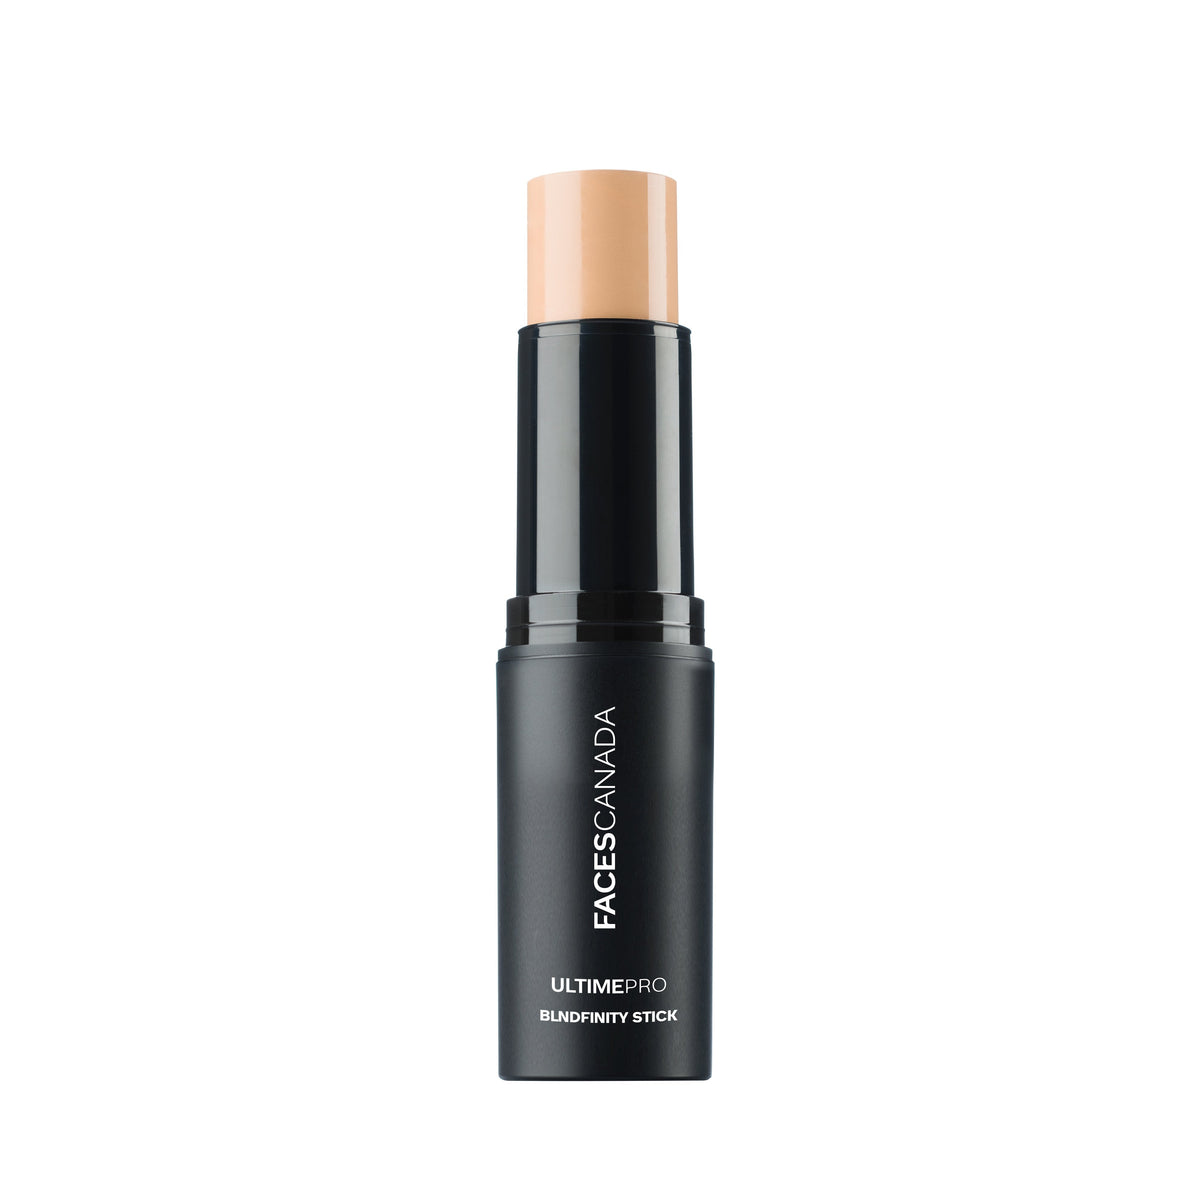 Faces Canada Ultime Pro BlendFinity Stick Concealer Faces Canada